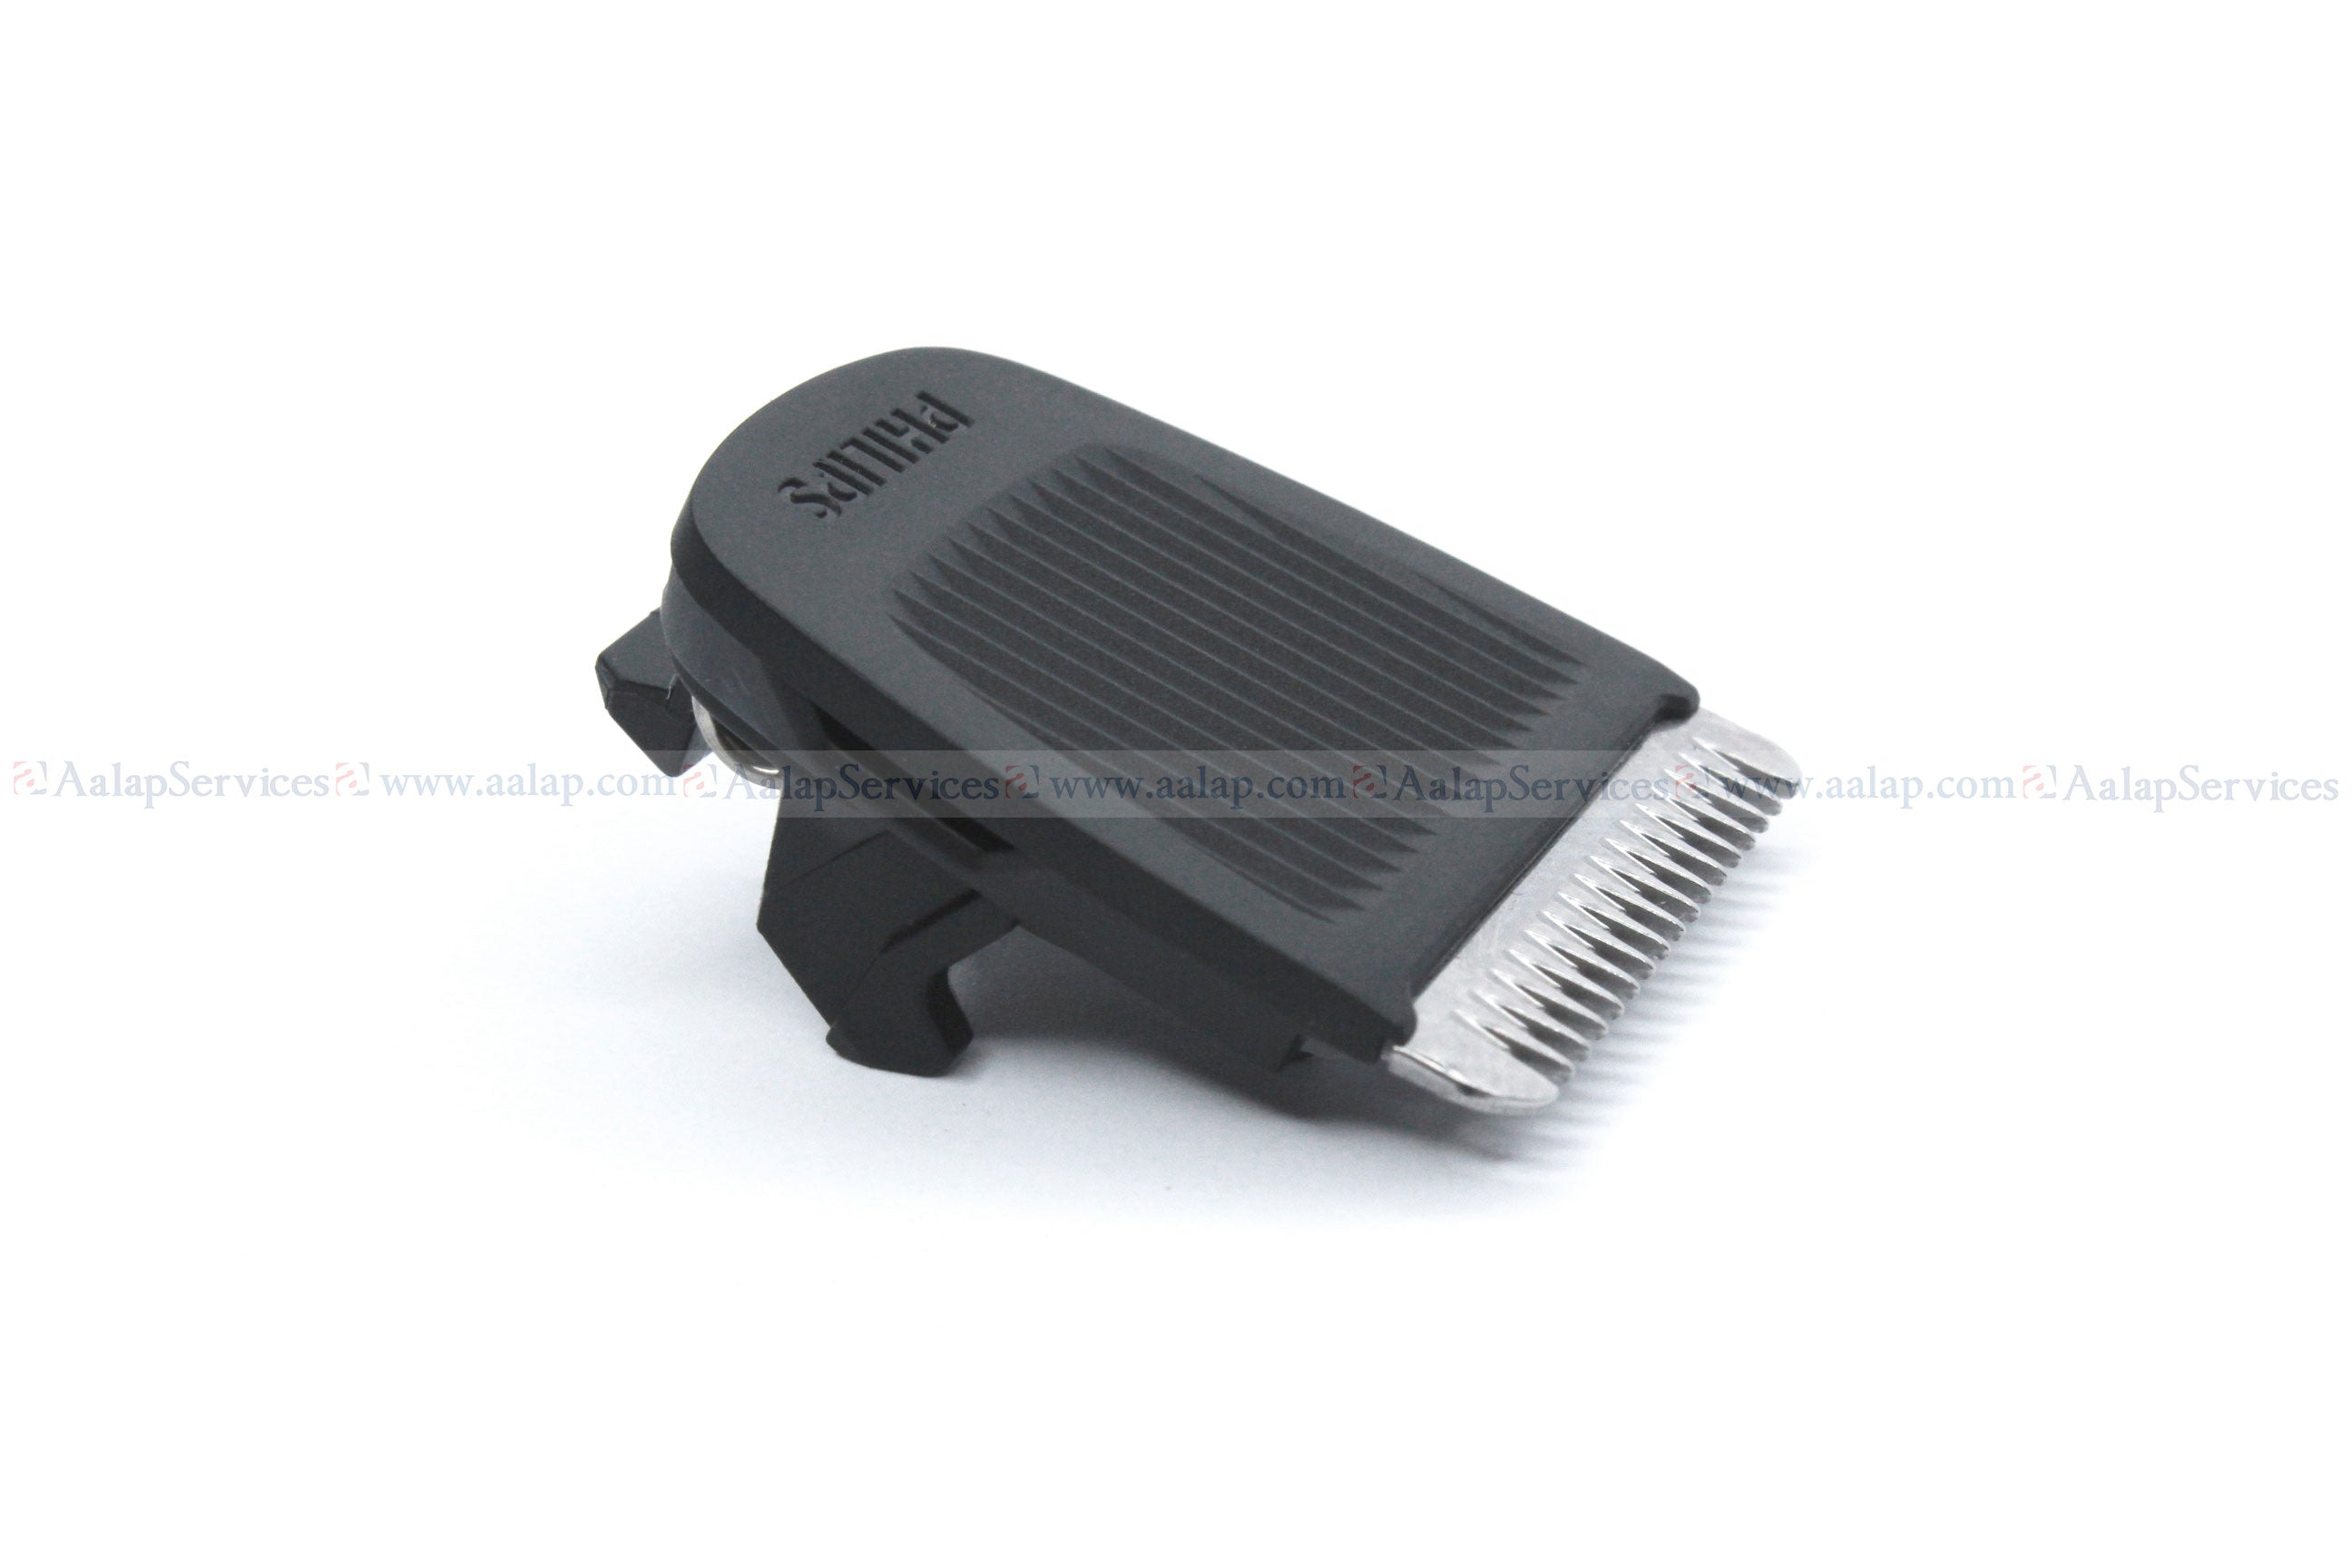 philips mg3750 replacement parts